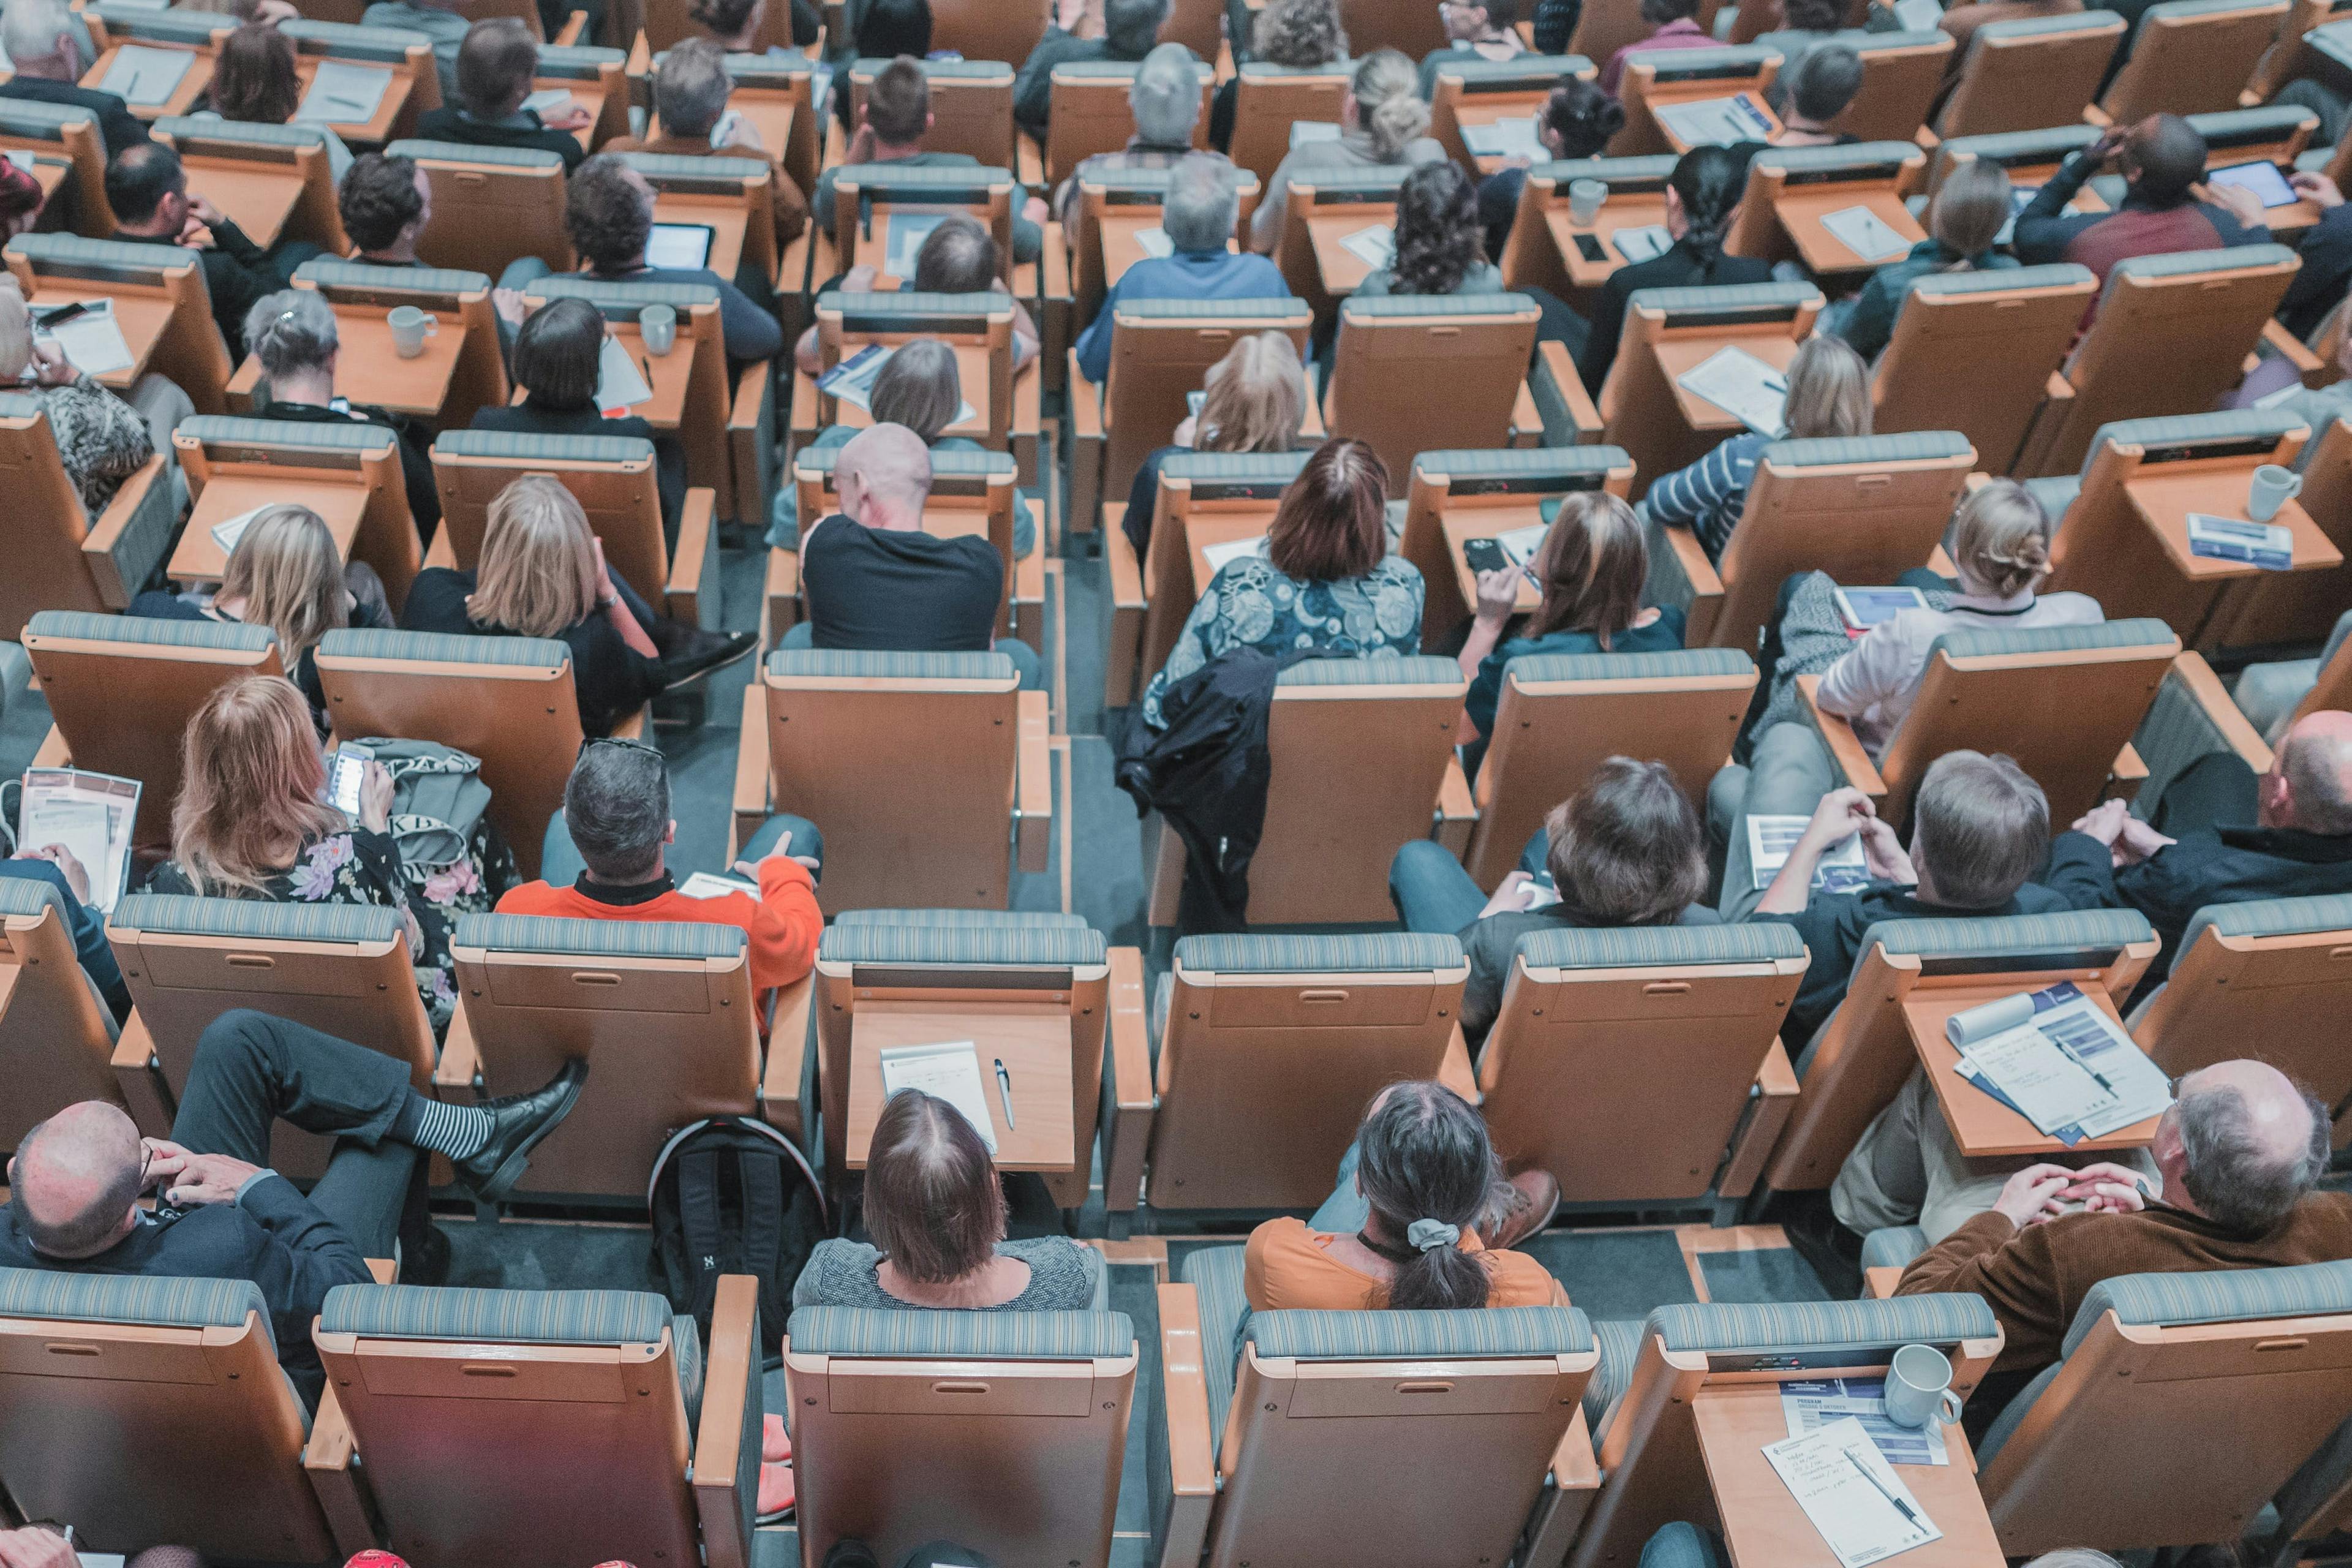 A bird’s eye view of a university lecture hall